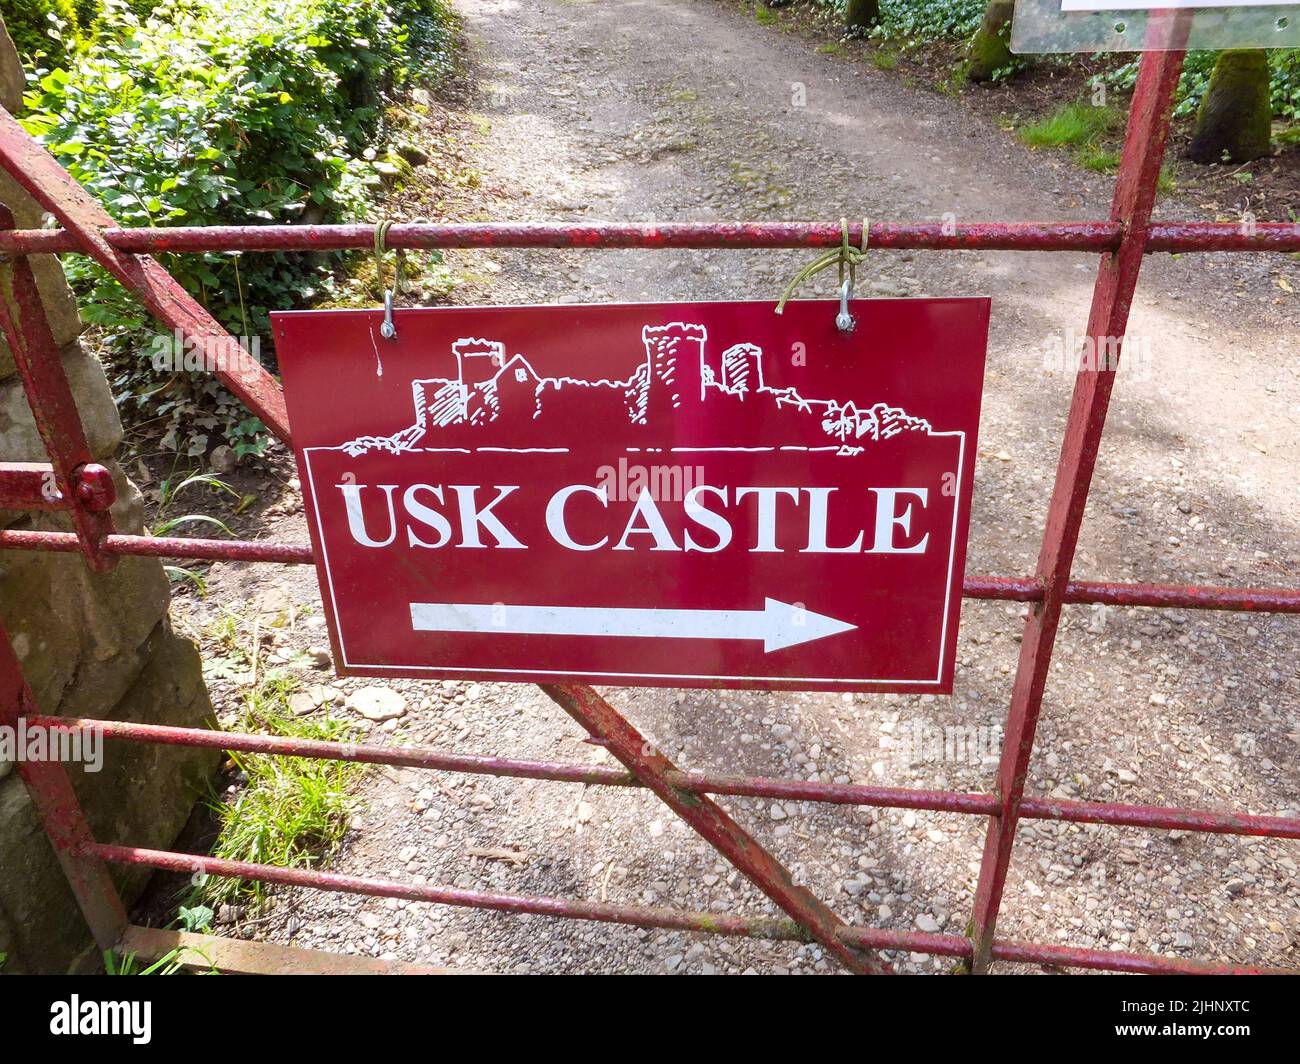 A red sign on a closed gate pointing to Usk Castle in Usk, Monmouthshire, Wales, UK. Stock Photo